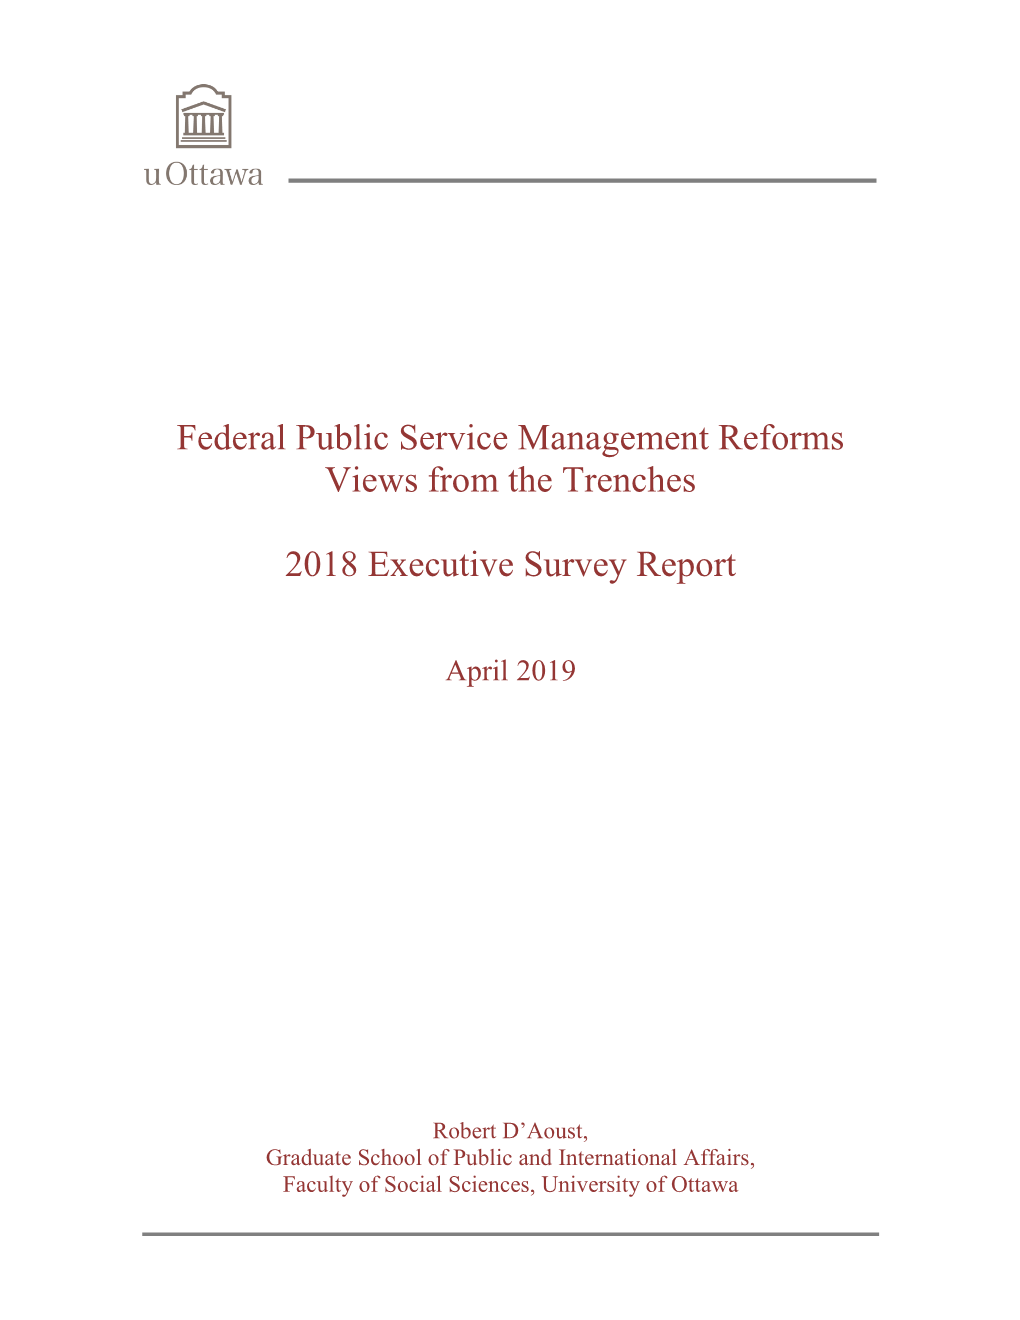 Federal Public Service Management Reforms Views from the Trenches